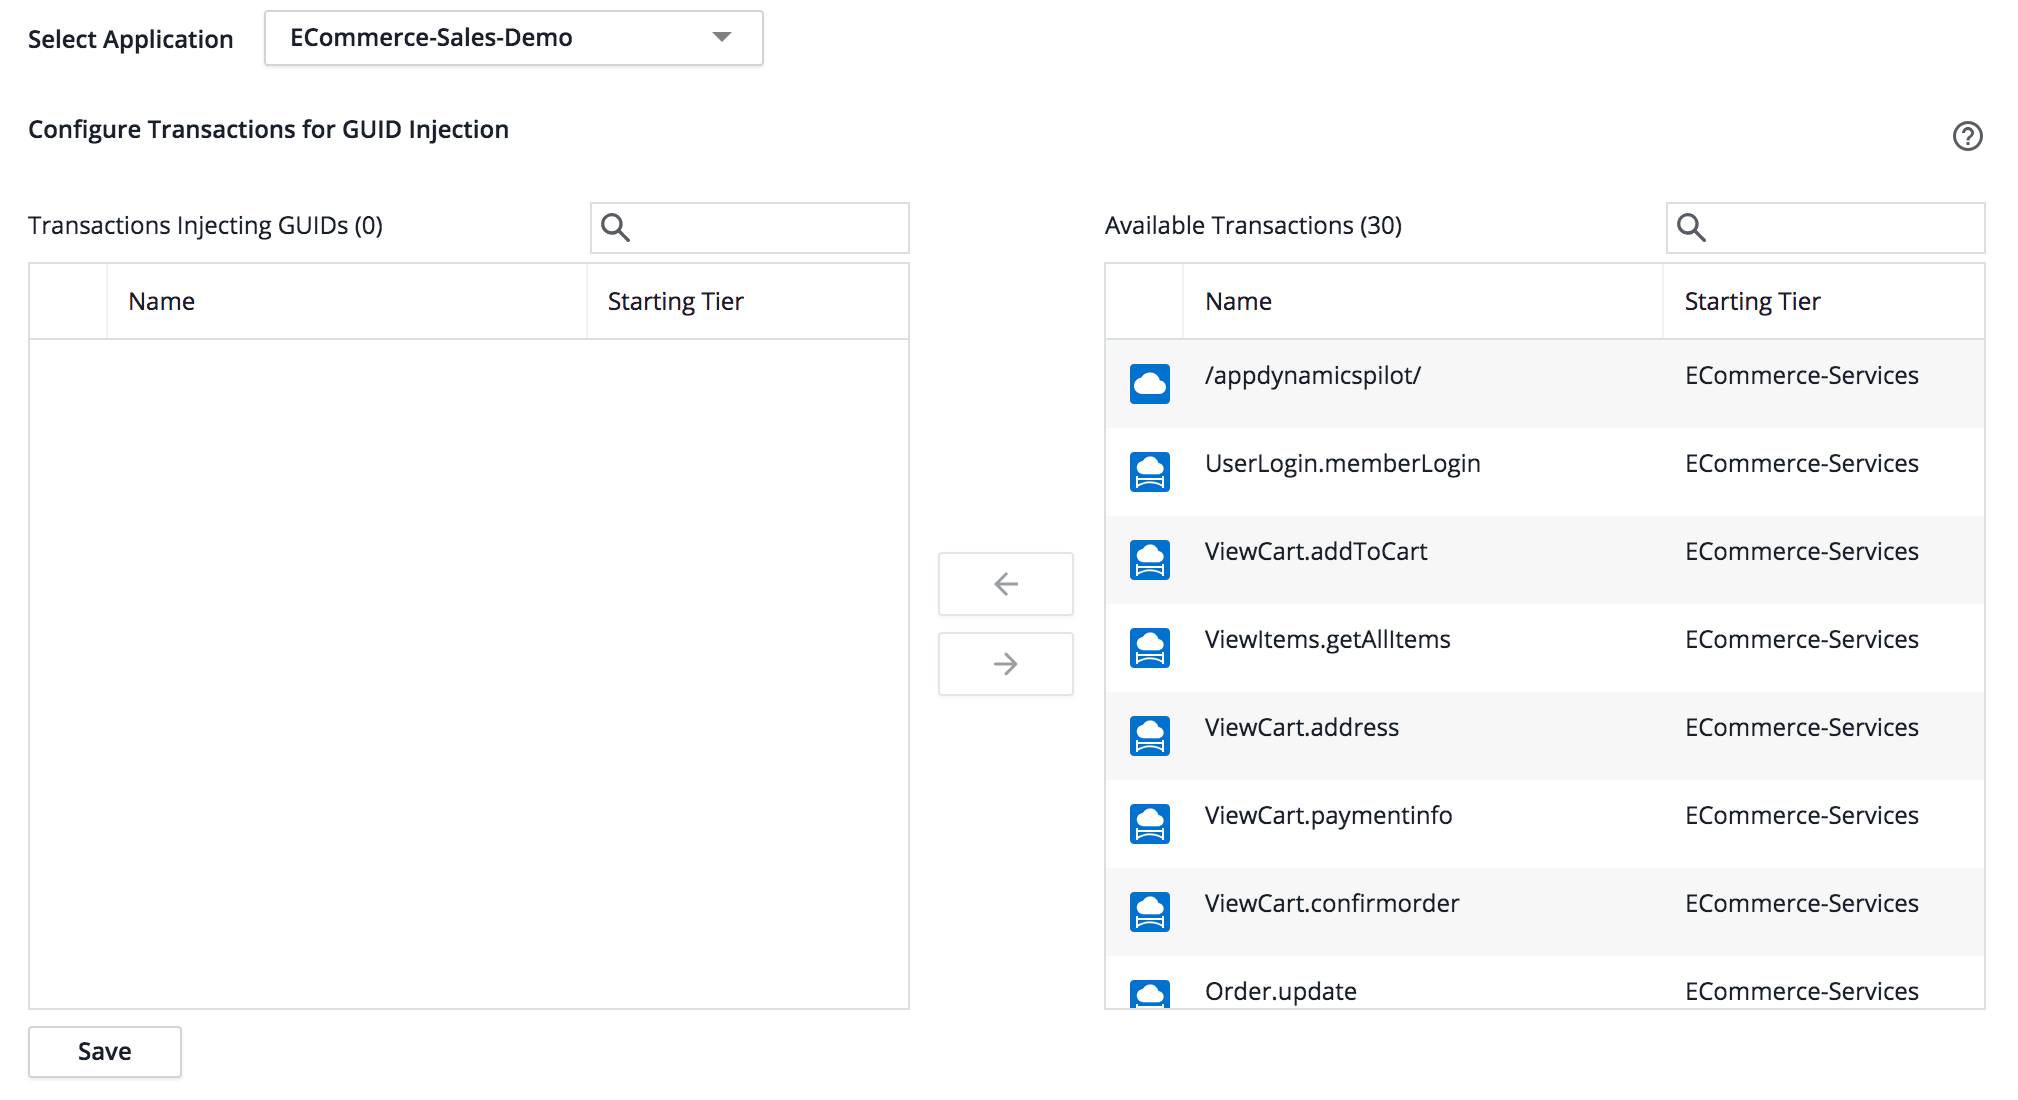 Configure Transactions for GUID Injection